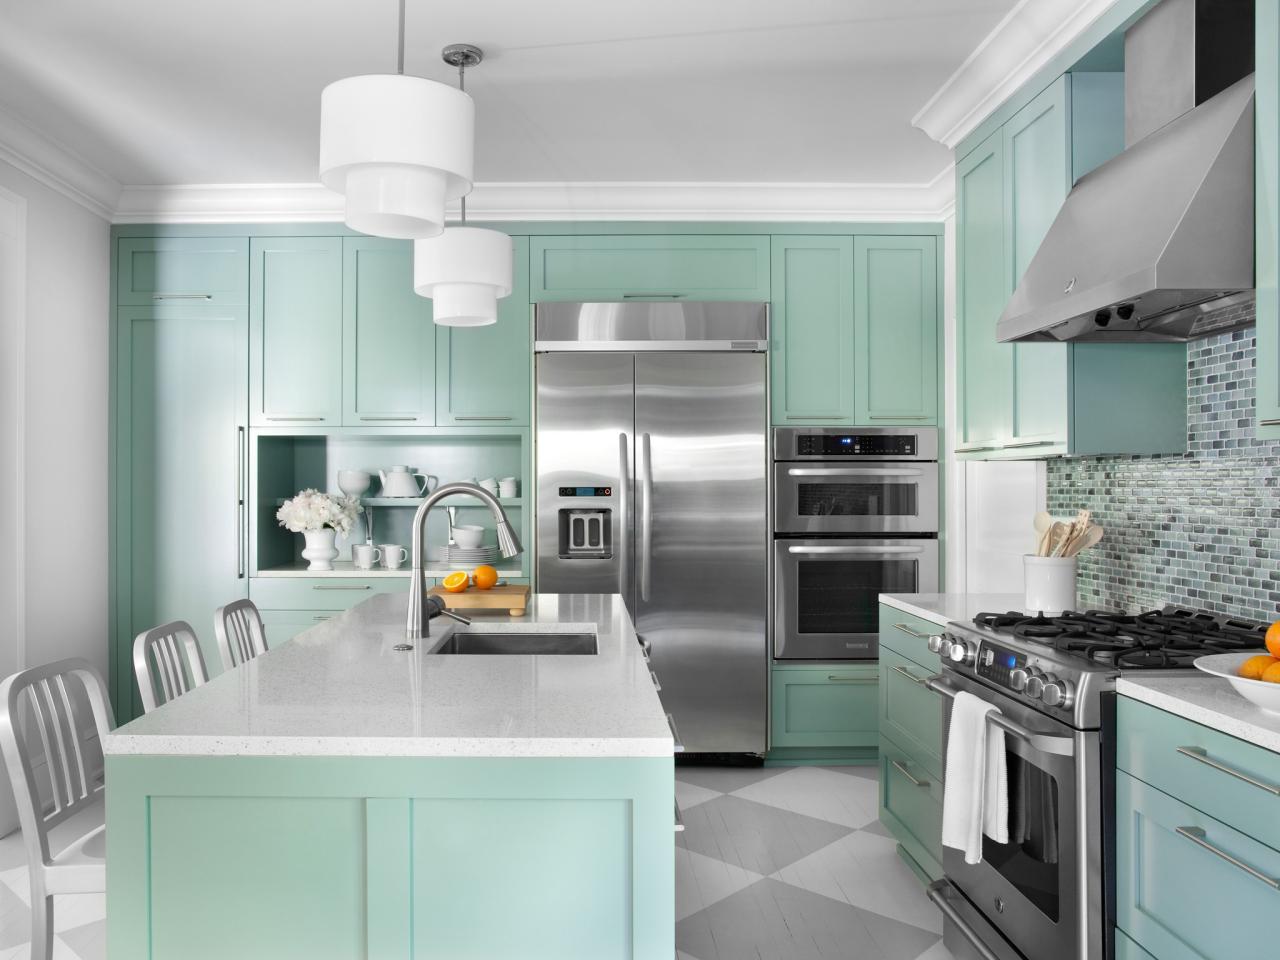 kitchen color ideas color ideas for painting kitchen cabinets FLACHAK